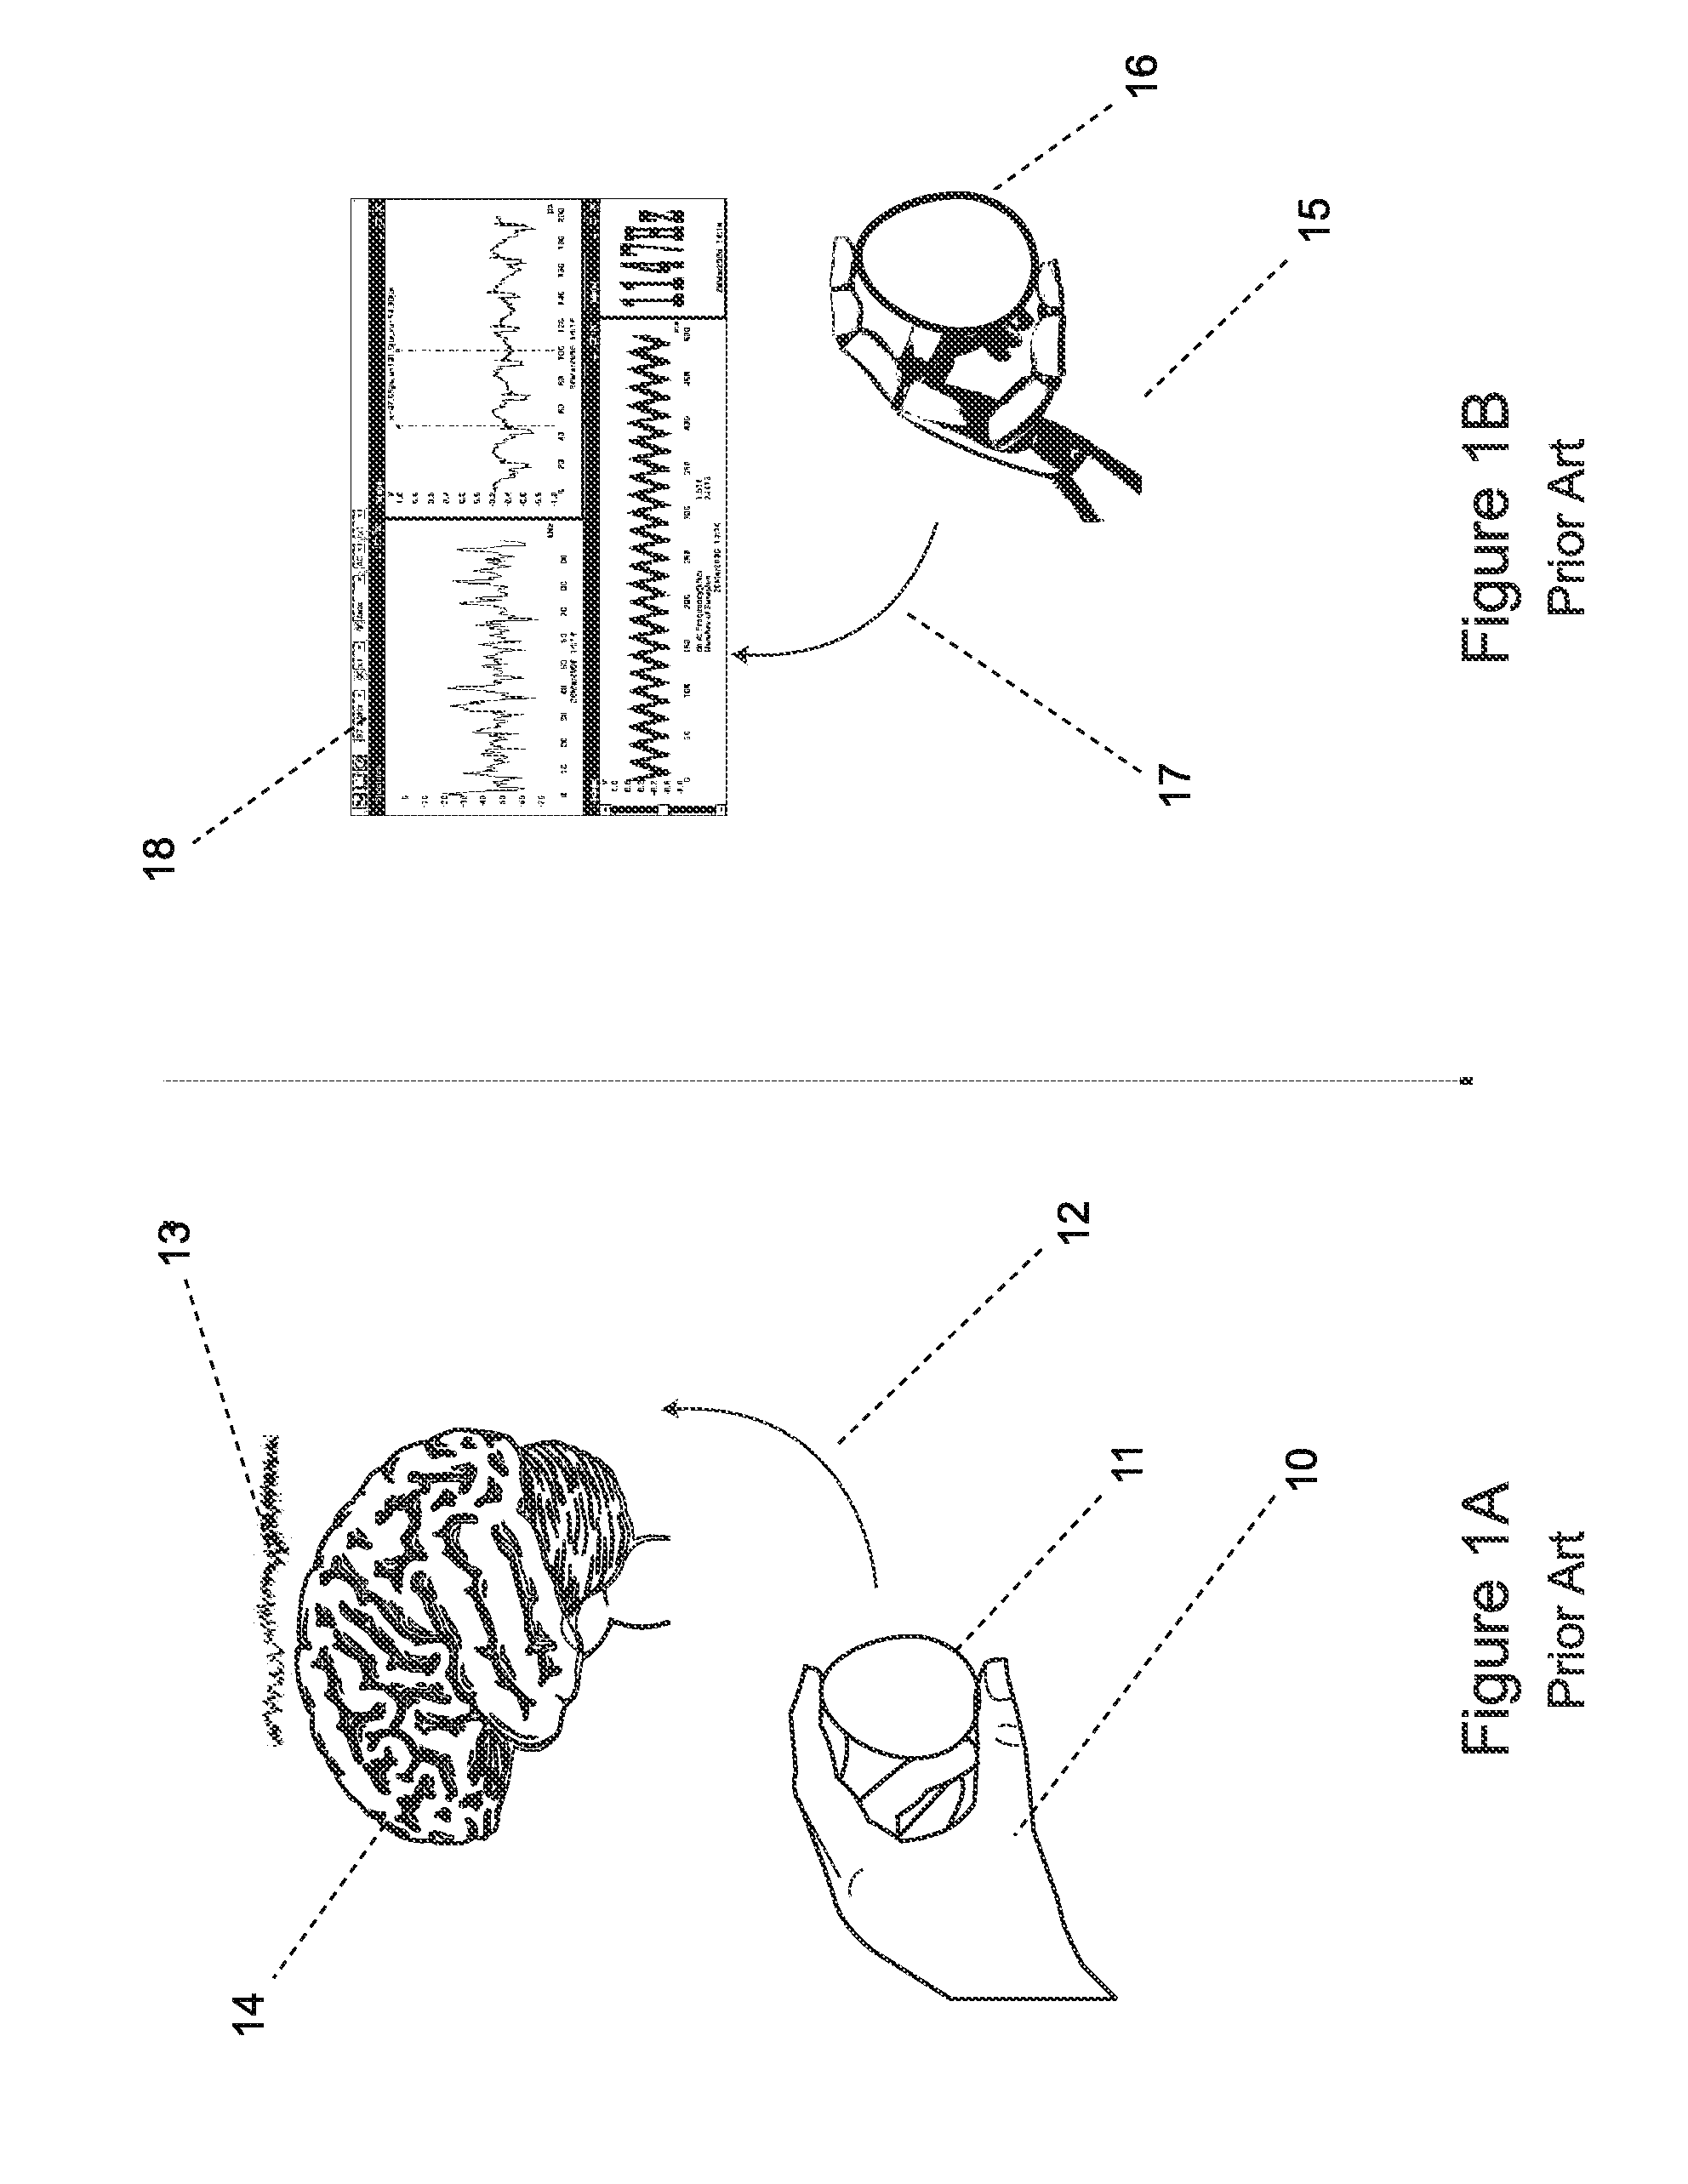 Device for providing tactile feedback for robotic apparatus using actuation